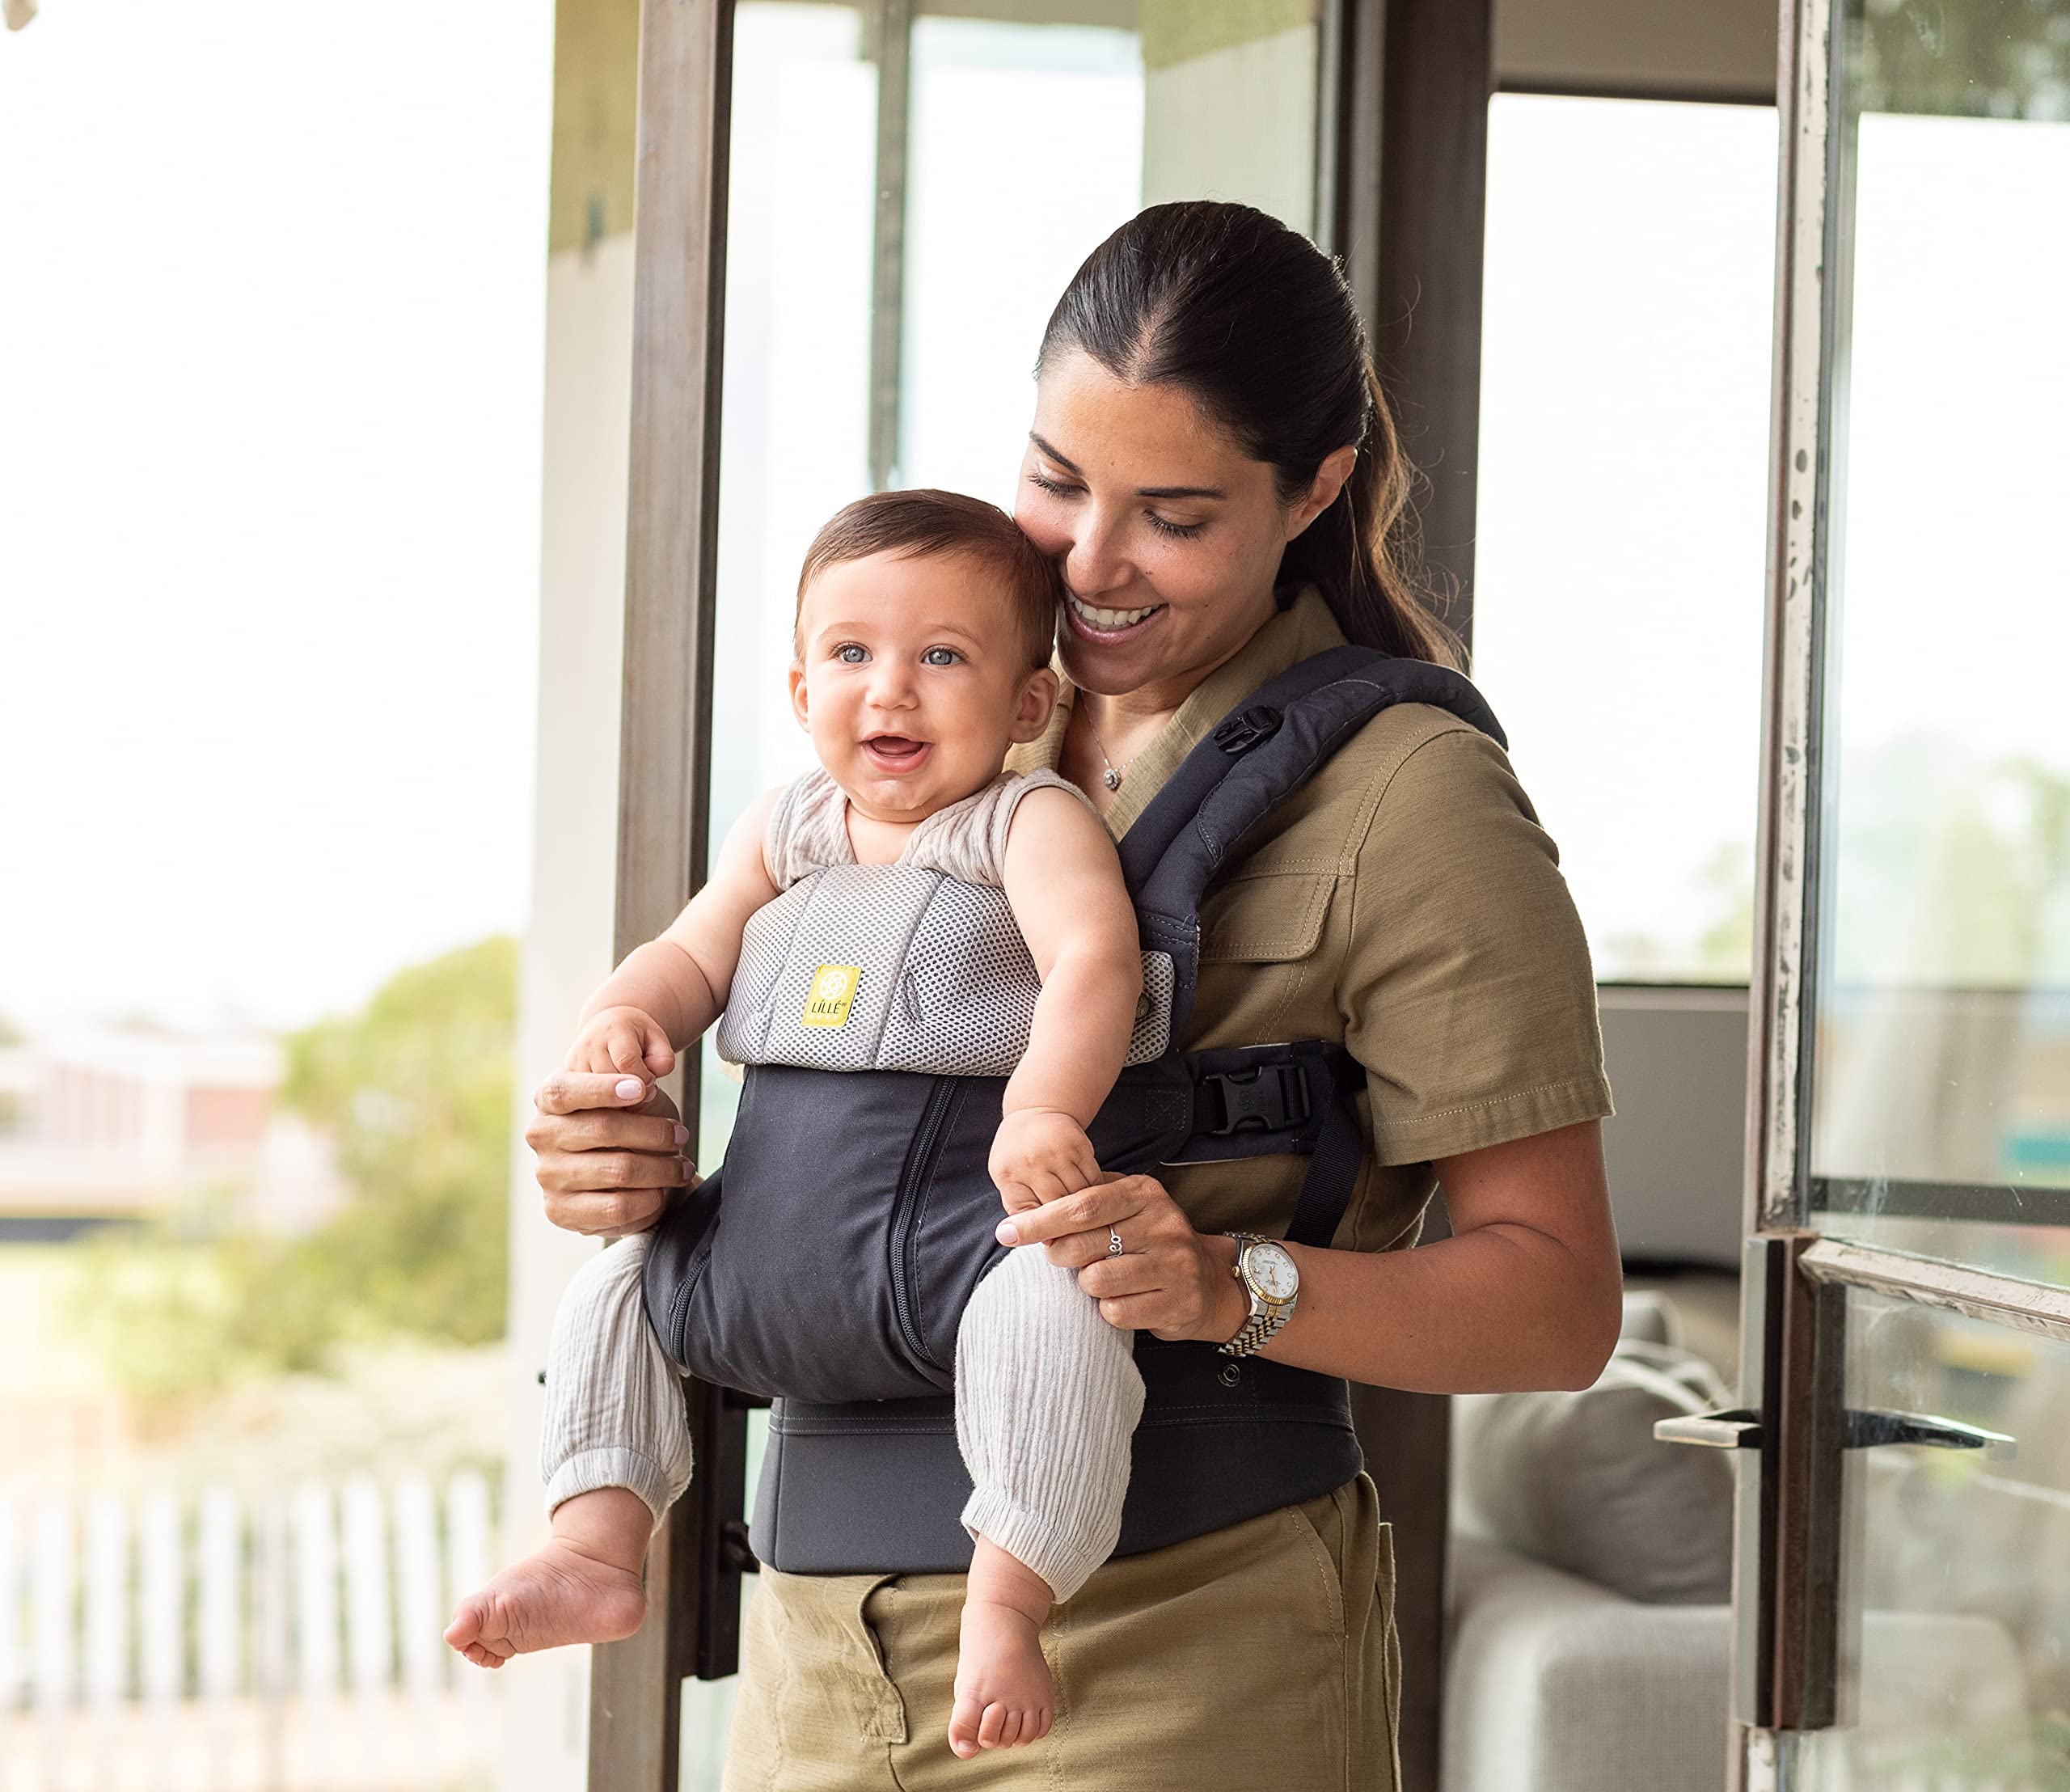 LÍLLÉbaby Complete All Seasons 6-in-1 Ergonomic Baby Carrier Newborn to Toddler - for Children 7-45 Pounds - Charcoal/Silver and Universal Pocket Pouch Bundle